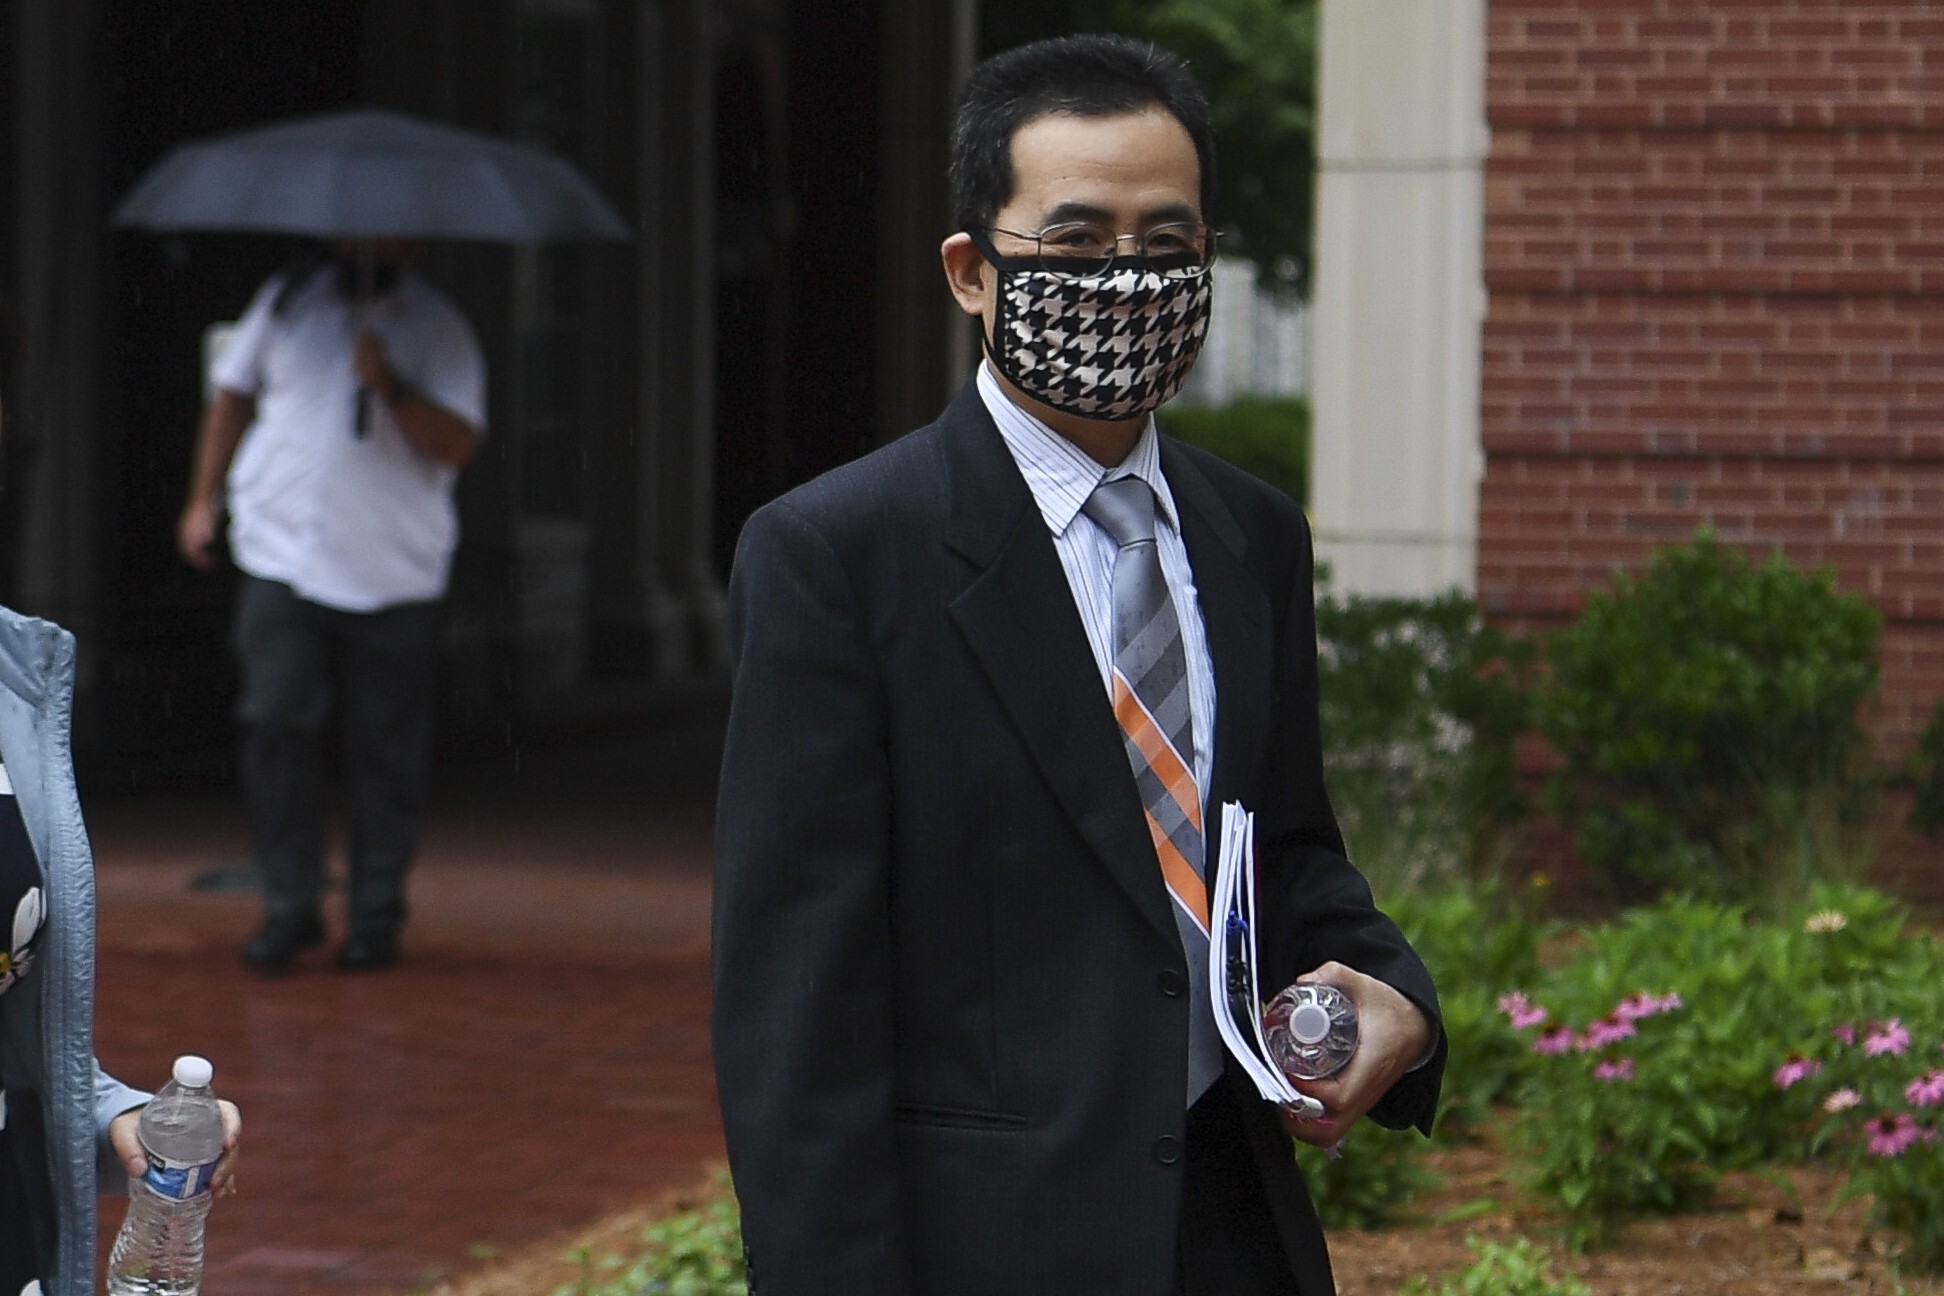 Former University of Tennessee professor Hu Anming, whose case has given fresh momentum to calls for the China Initiative to be investigated over whether it has targeted Asians. Photo: AP